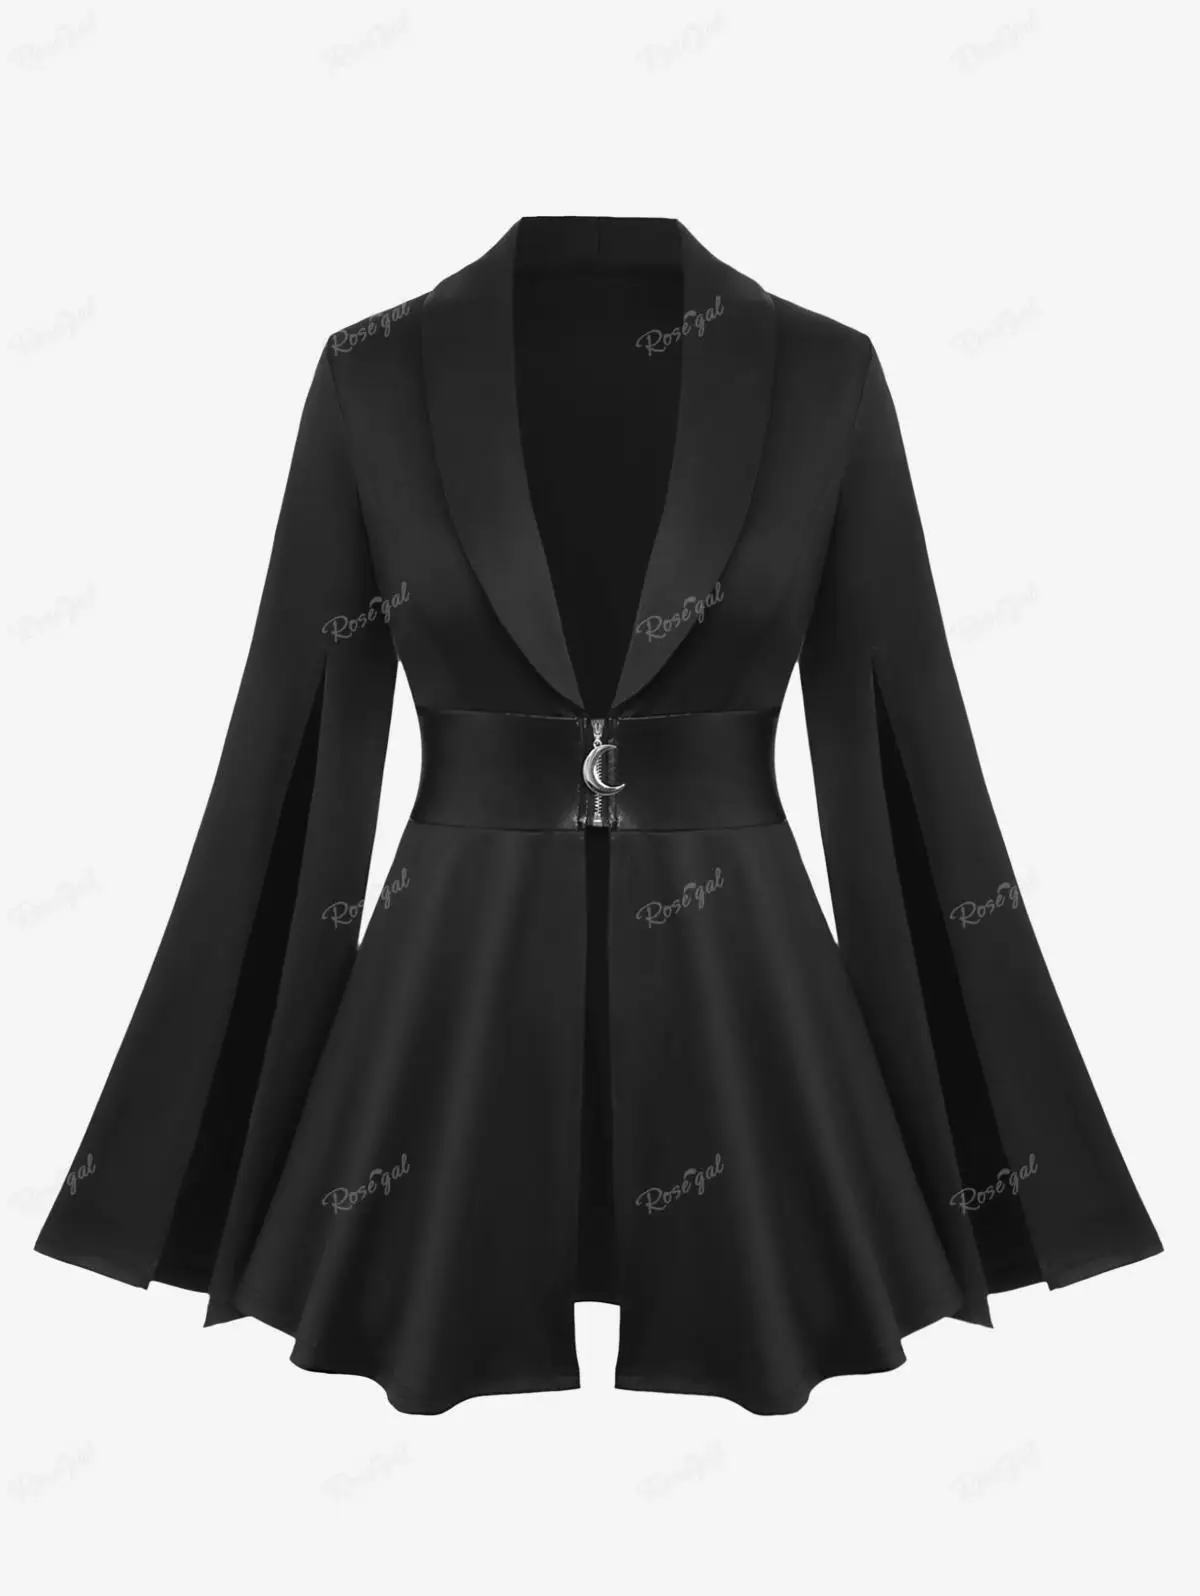 

ROSEGAL Plus Size Gothic Wide-waisted Coat Lapel Collar Split Flutter Sleeves PU Panel Zipper Belted Ruched Jacket Outwear Black